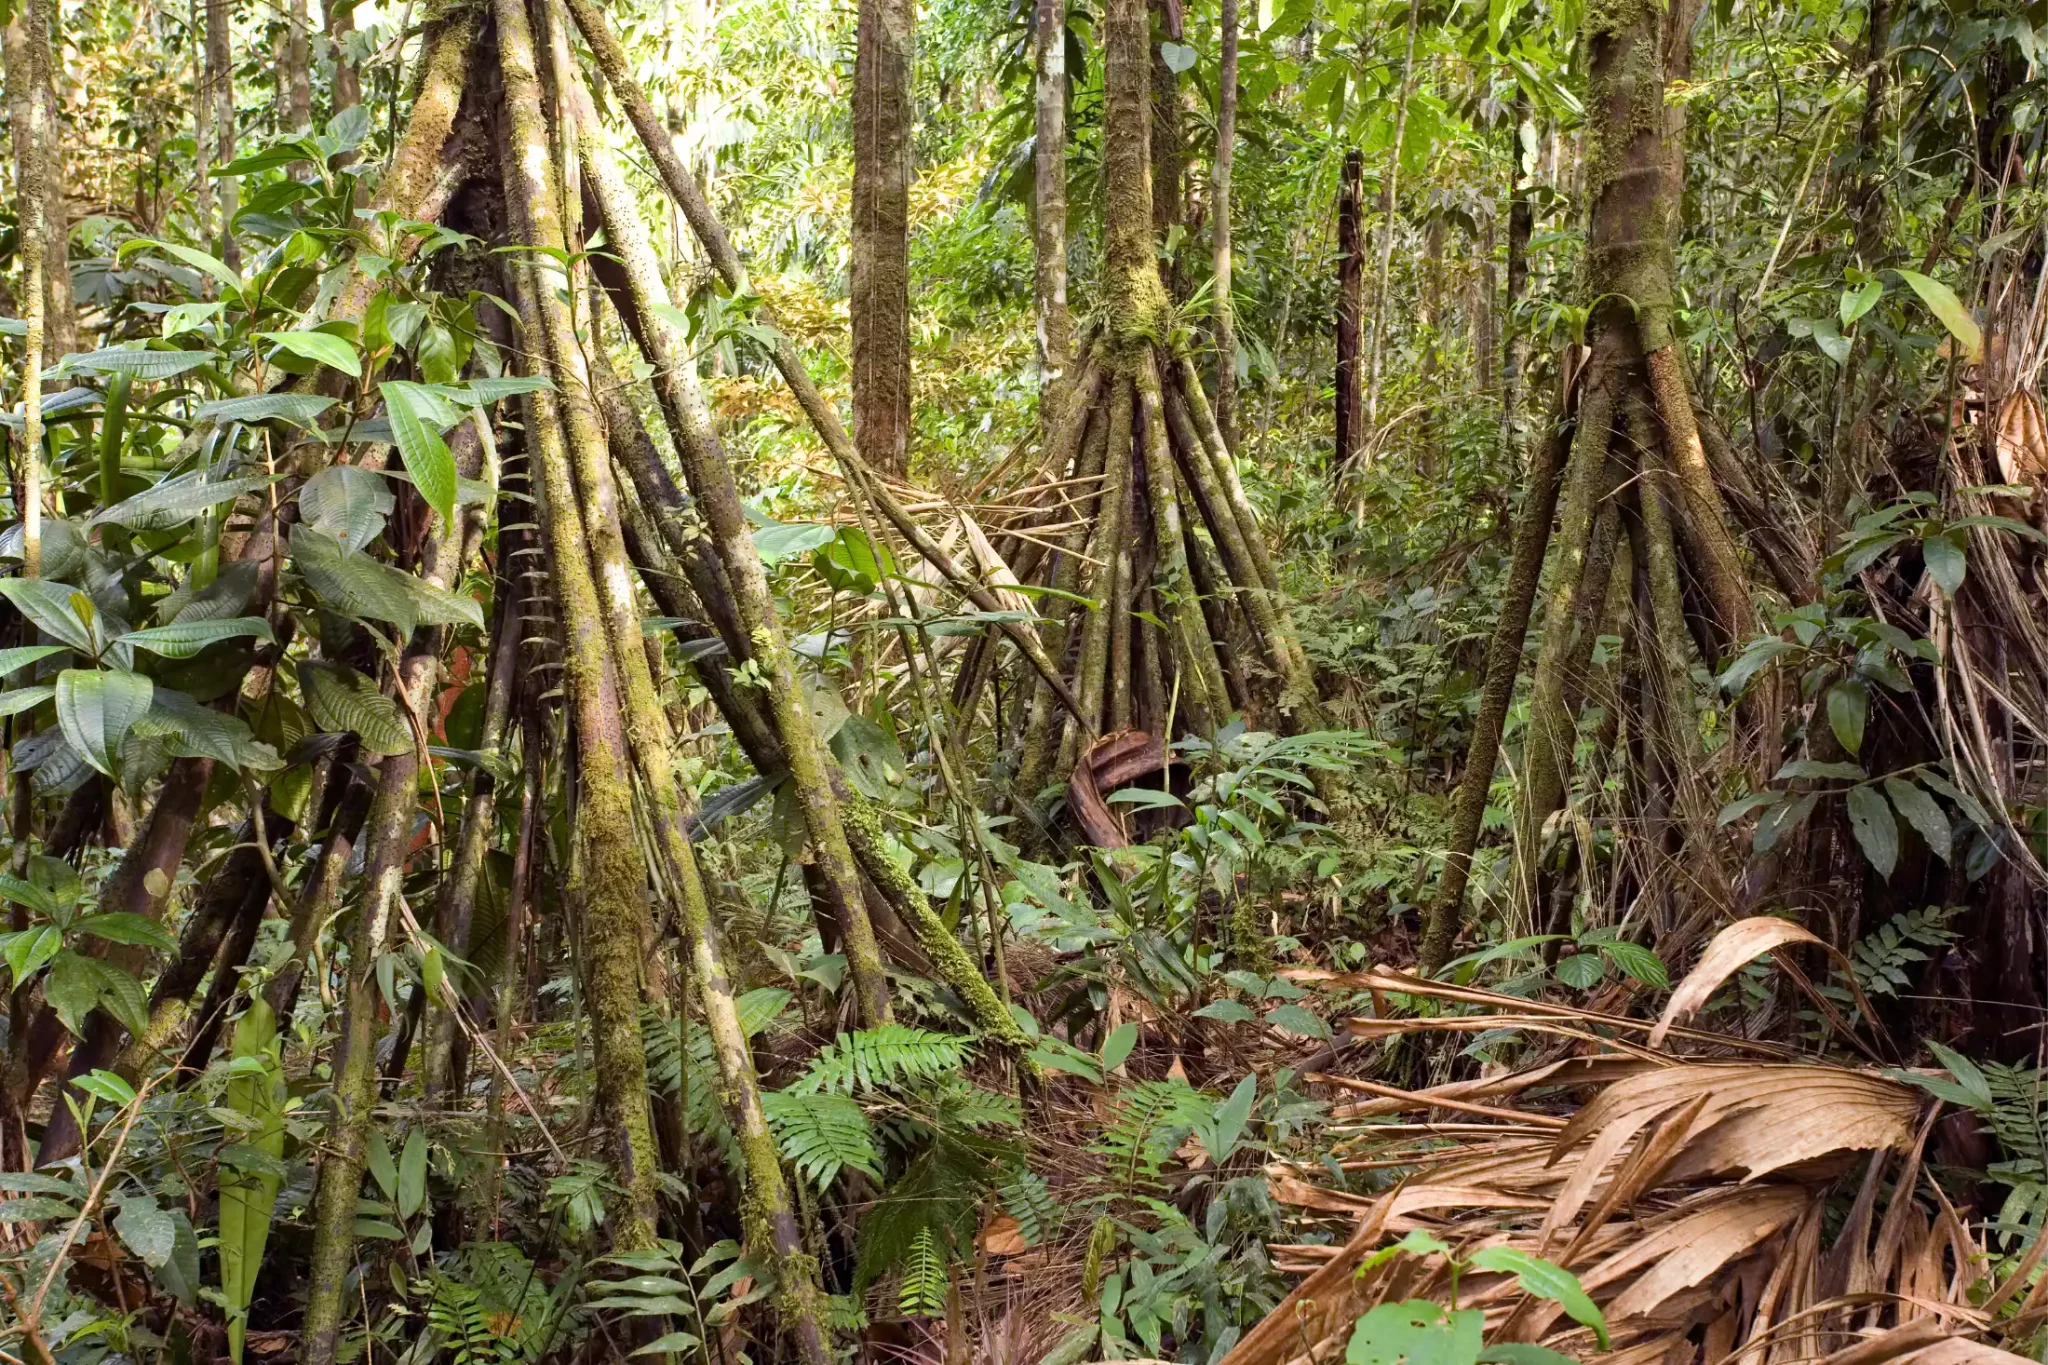 Grove of the Seychelles Stilt Palms with their unique root system.